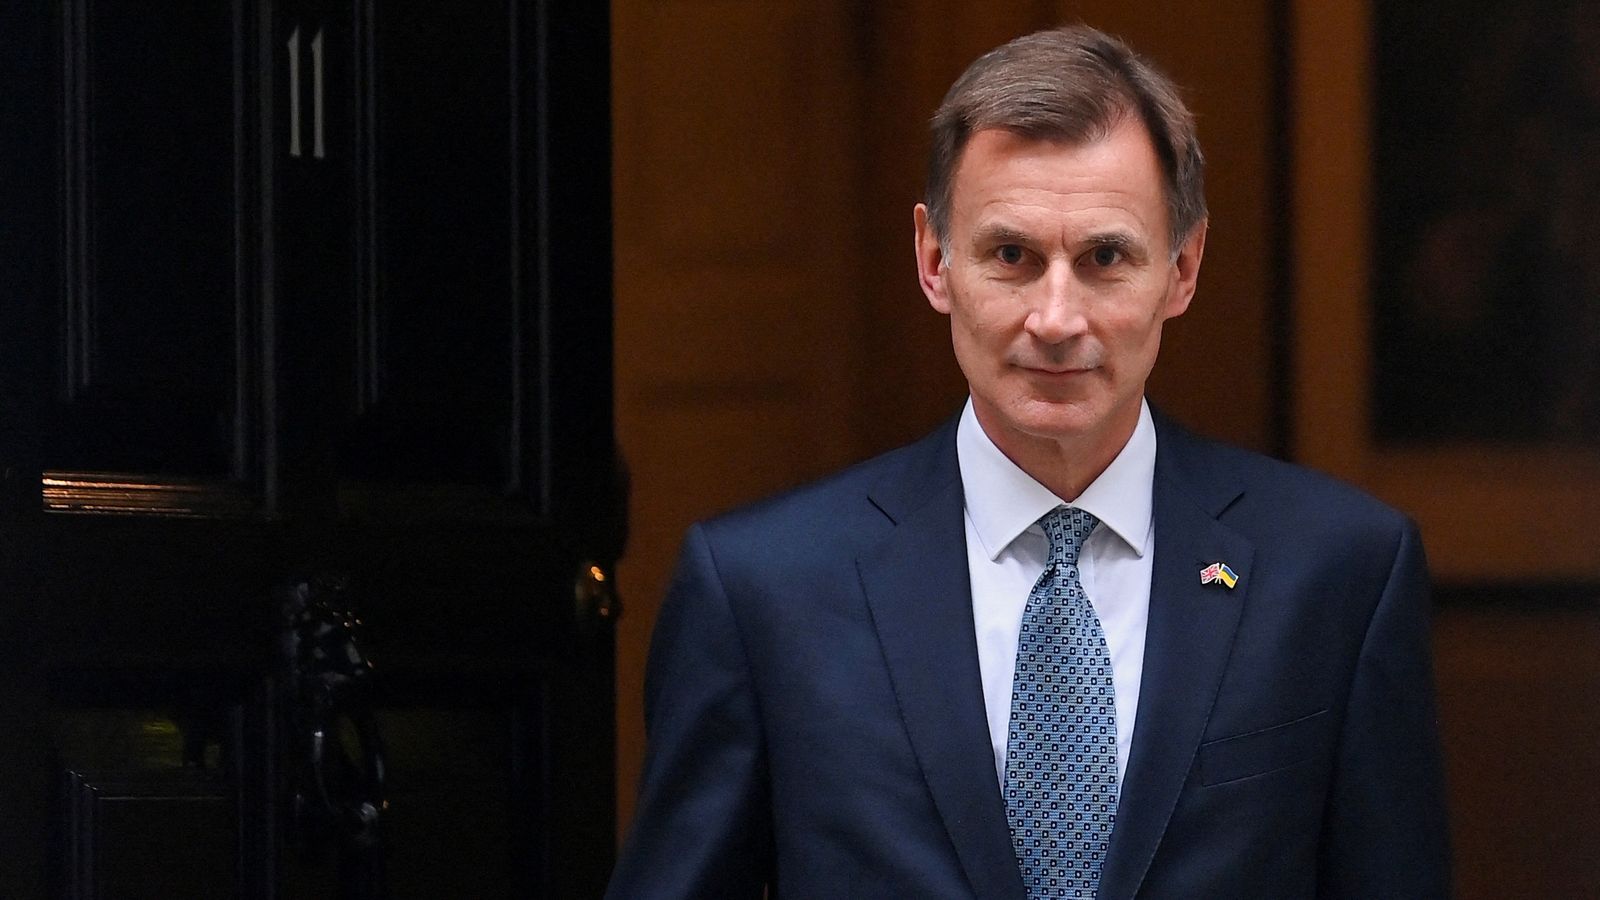 Next two years will be 'challenging', says Chancellor Jeremy Hunt - as disposable incomes head for biggest fall on record